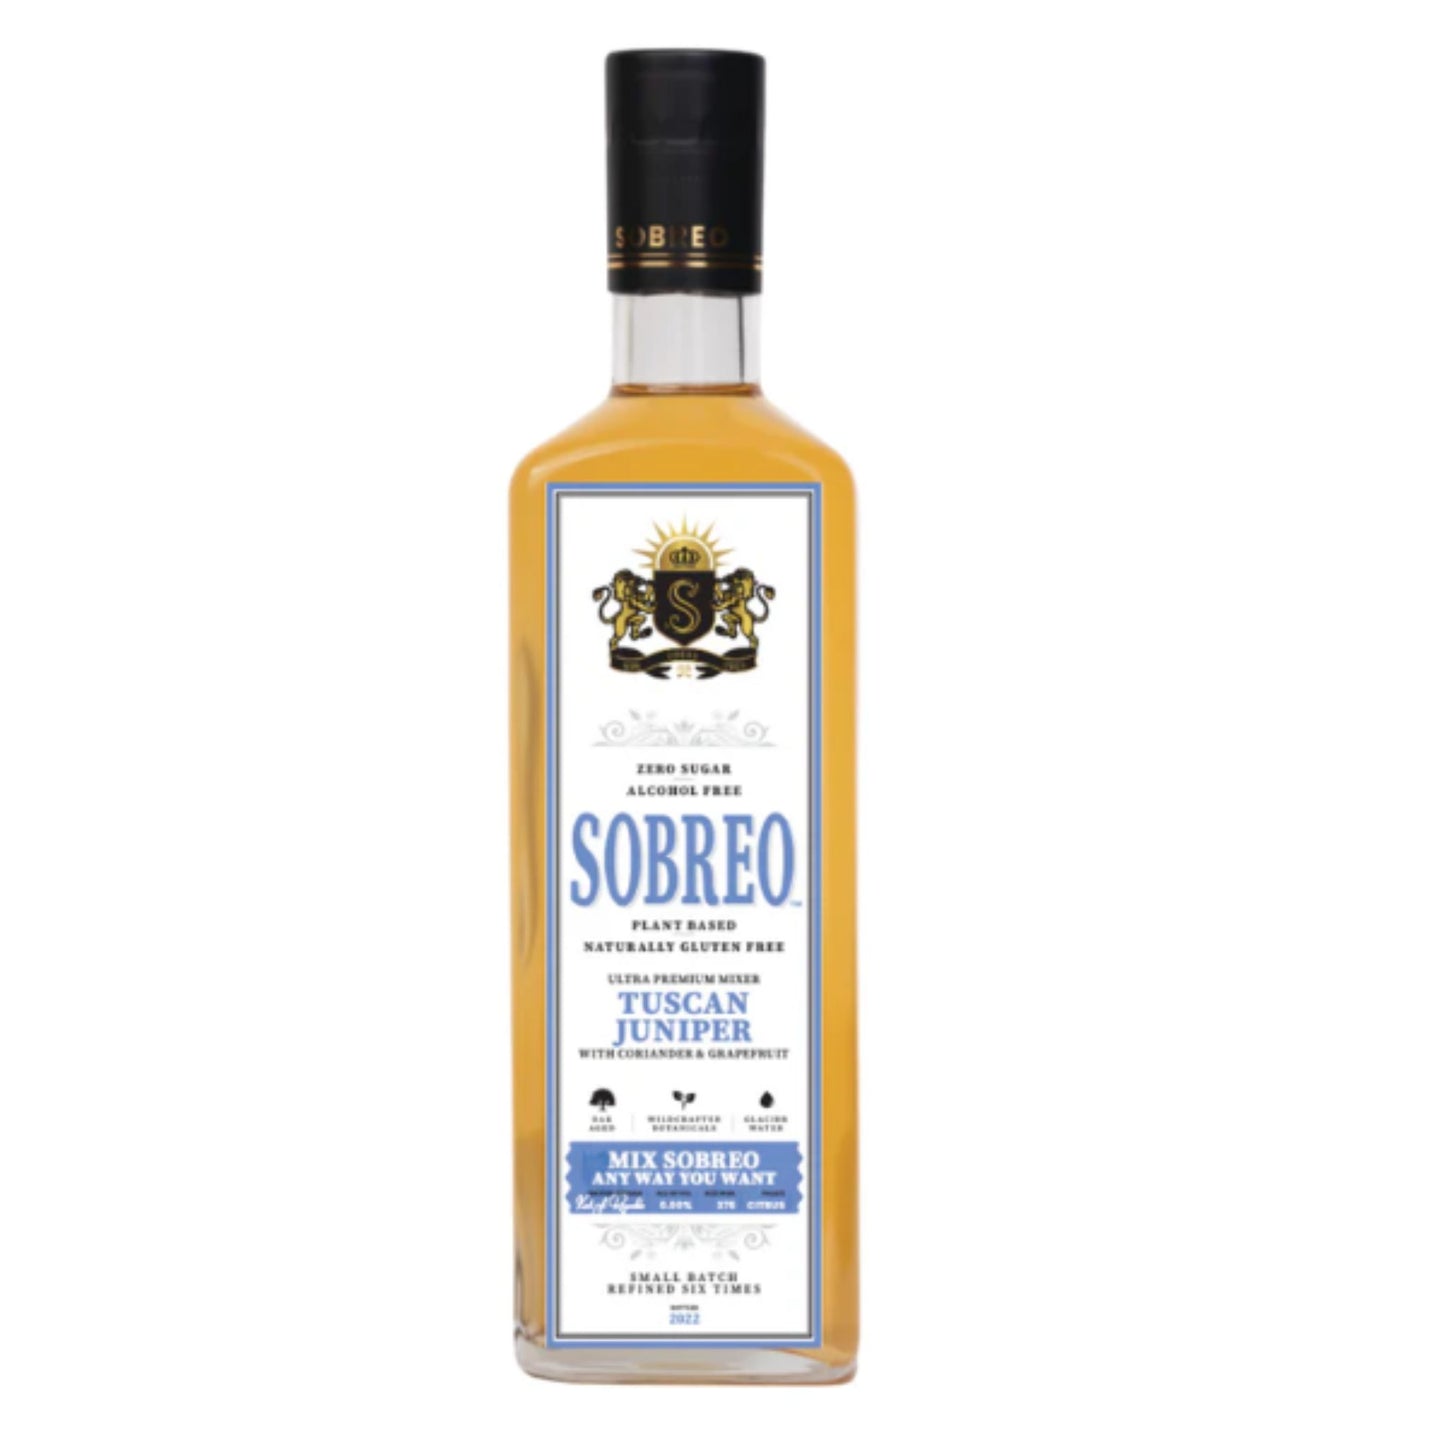 Sobreo Tuscan Juniper non-alcoholic cocktail mixer is available for sale at Knyota Drinks.